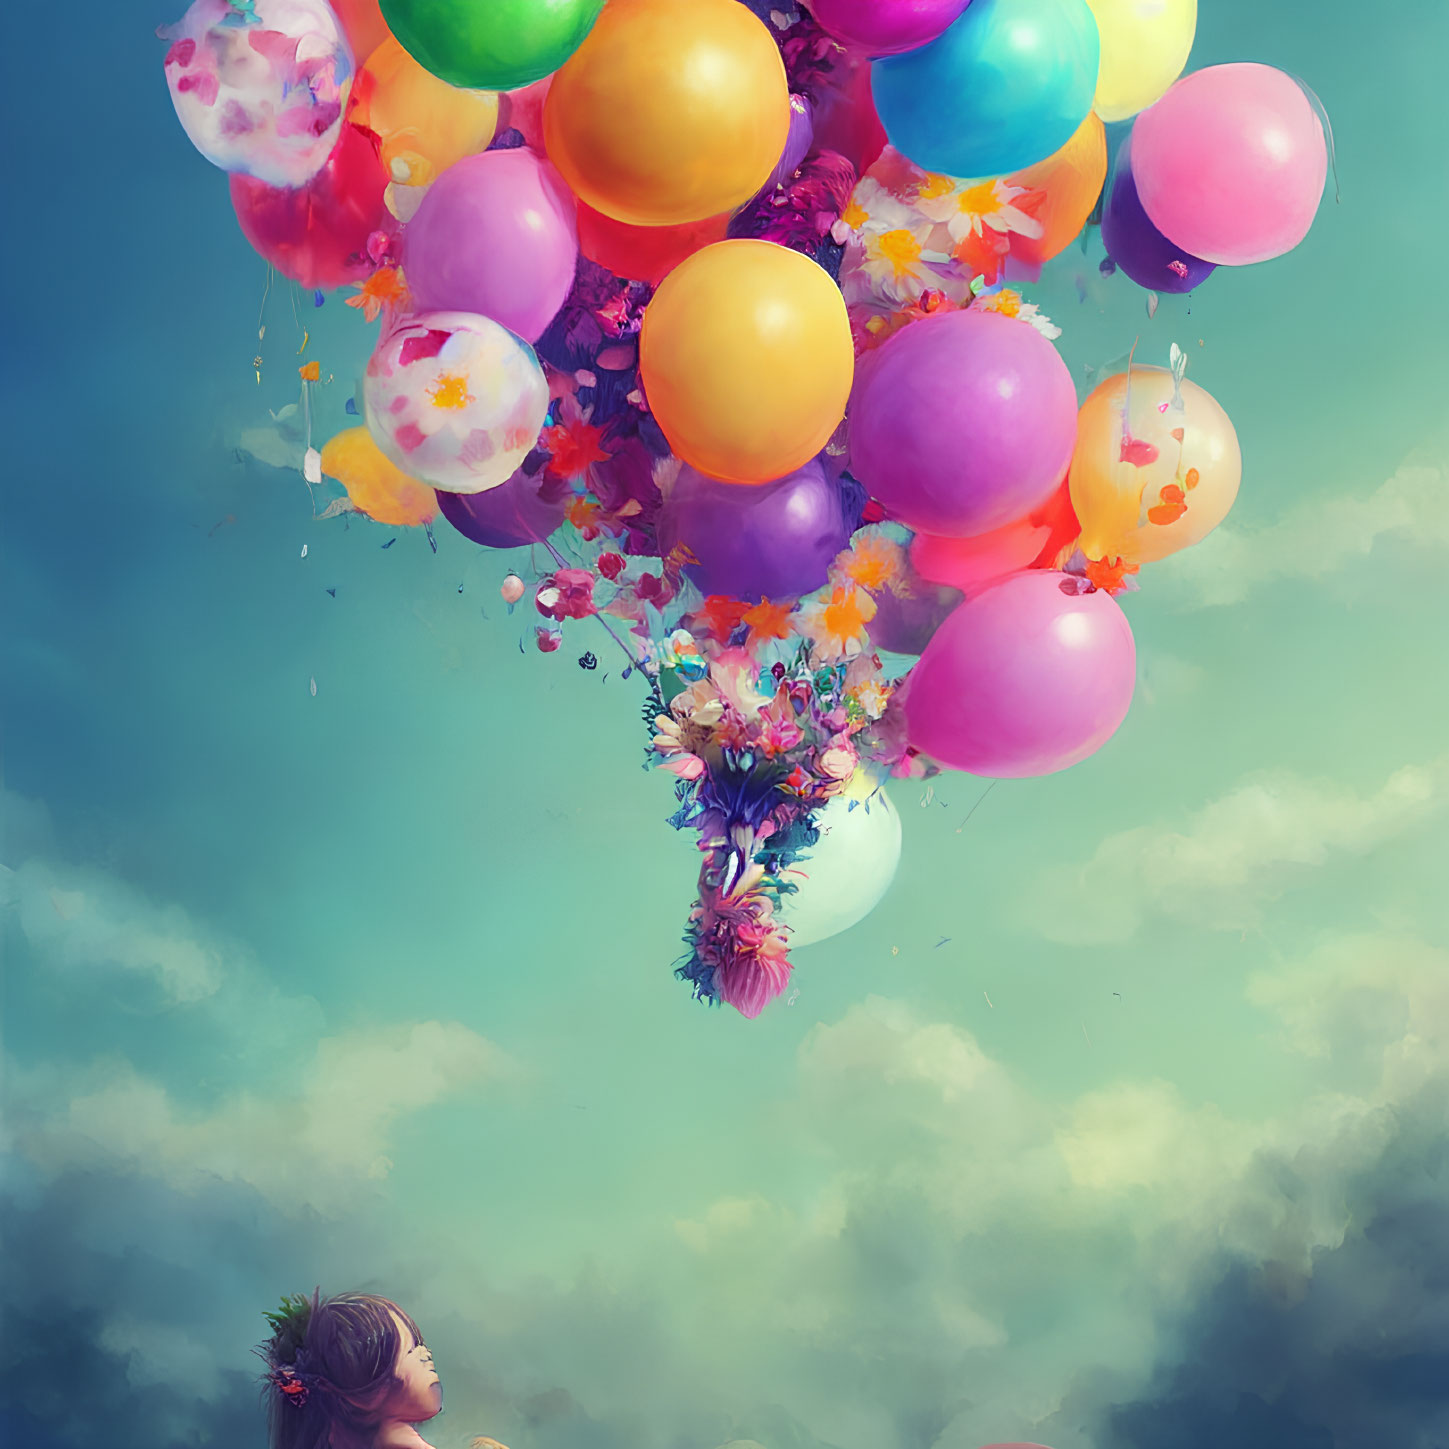 Child admiring balloons and flowers in the sky